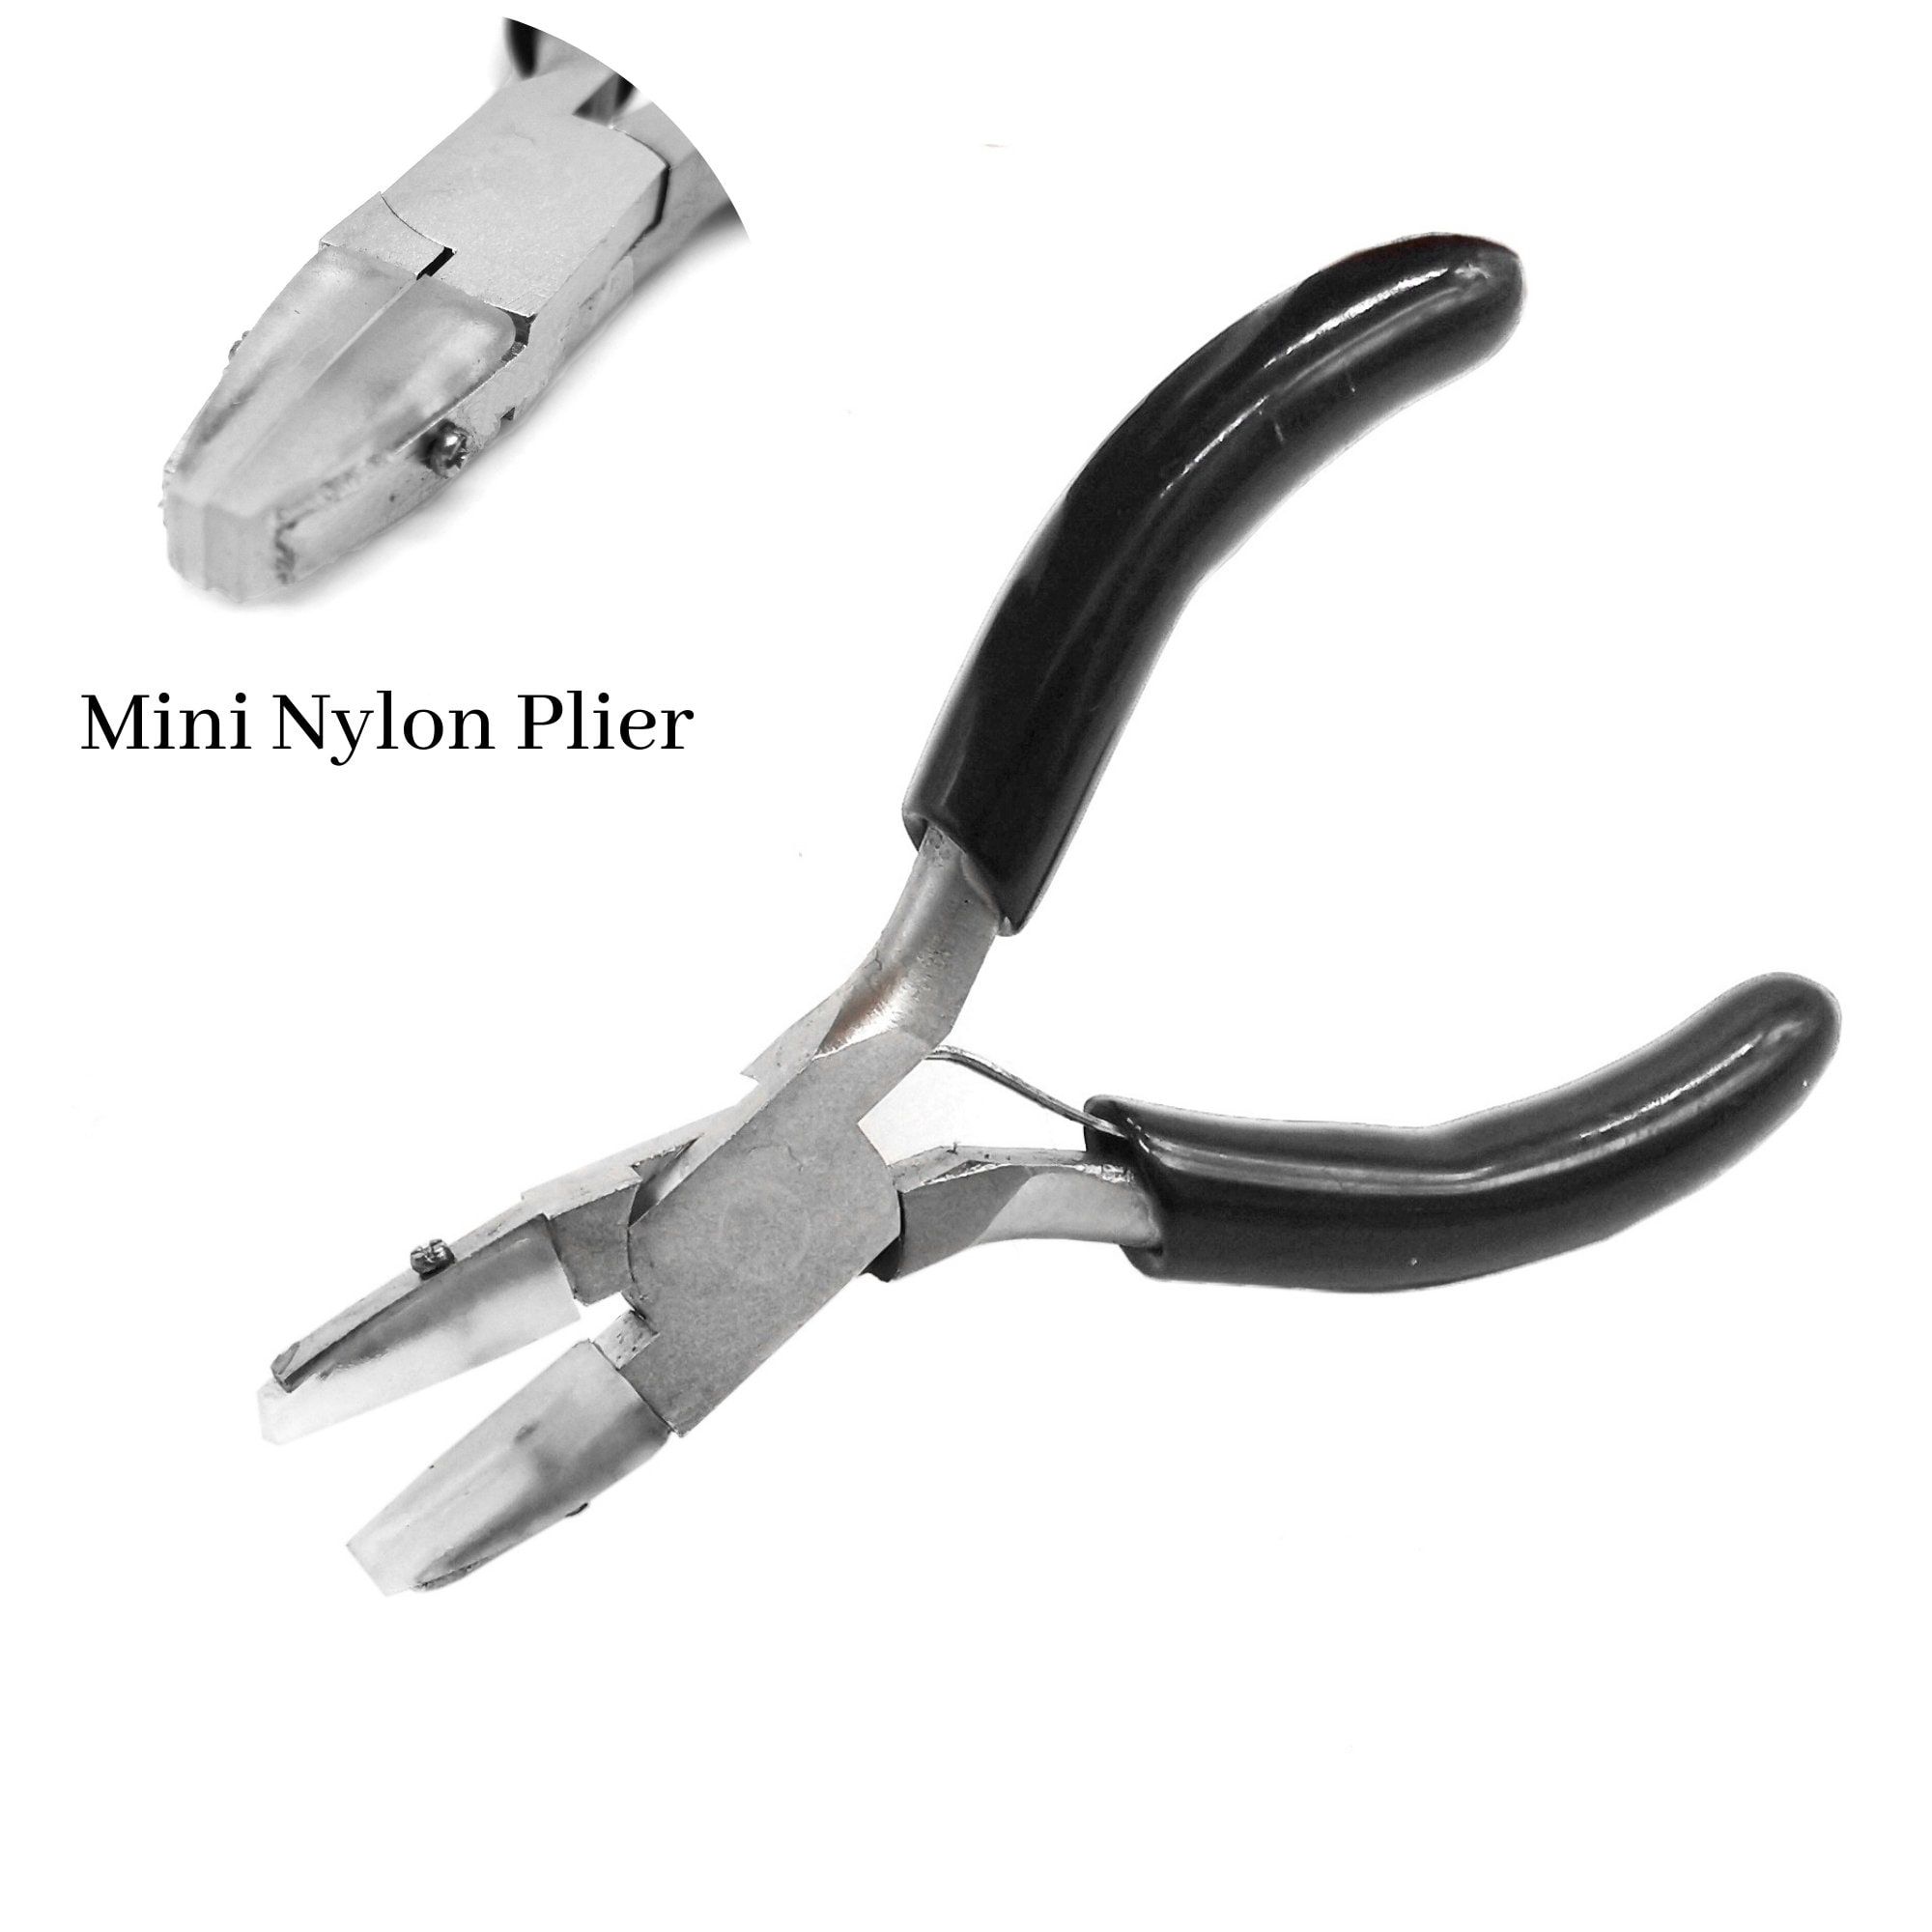 Mini JewelrySupply Mini Nylon Jaw Pliers for Wire Wraping DIY Crafting  Projects